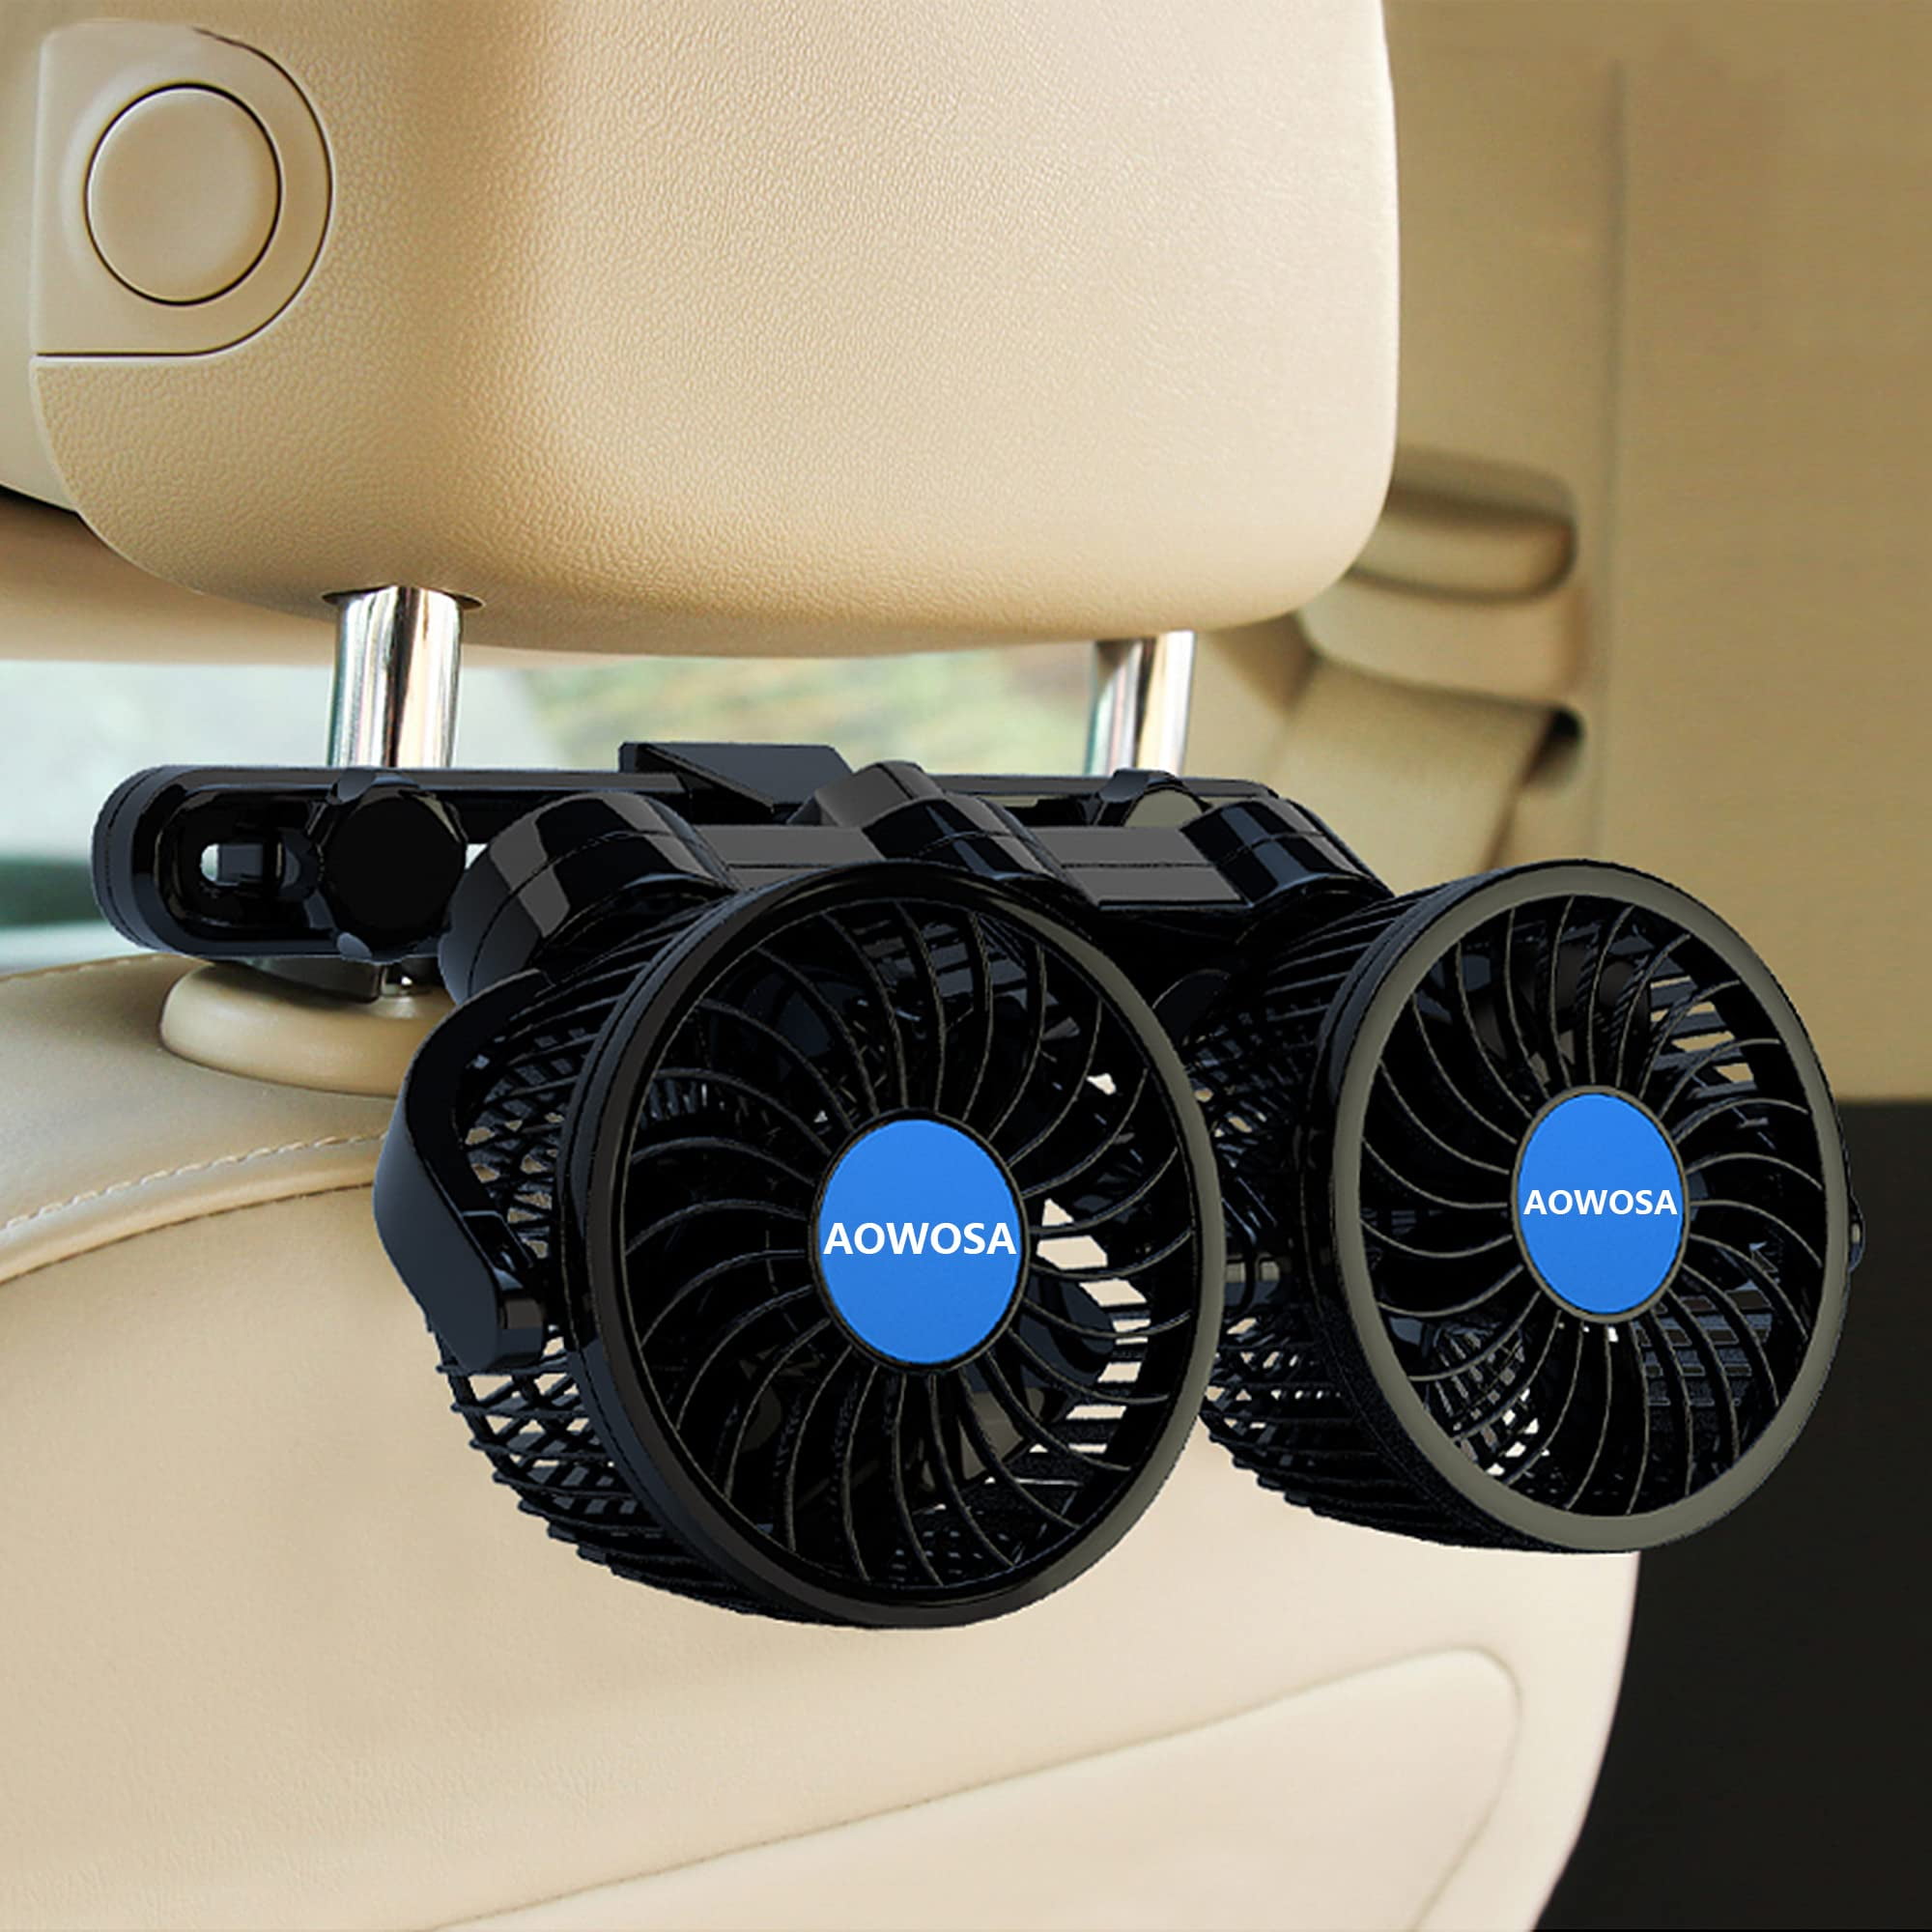 Car Fan 12V Automobile Cooling Fan for Backseat, Portable Cigarette Lighter Plug Seat Fan 360 Dual Head Rotatable with Stepless Speed Regulation for SUV, RV, Van, Vehicles - Walmart.com